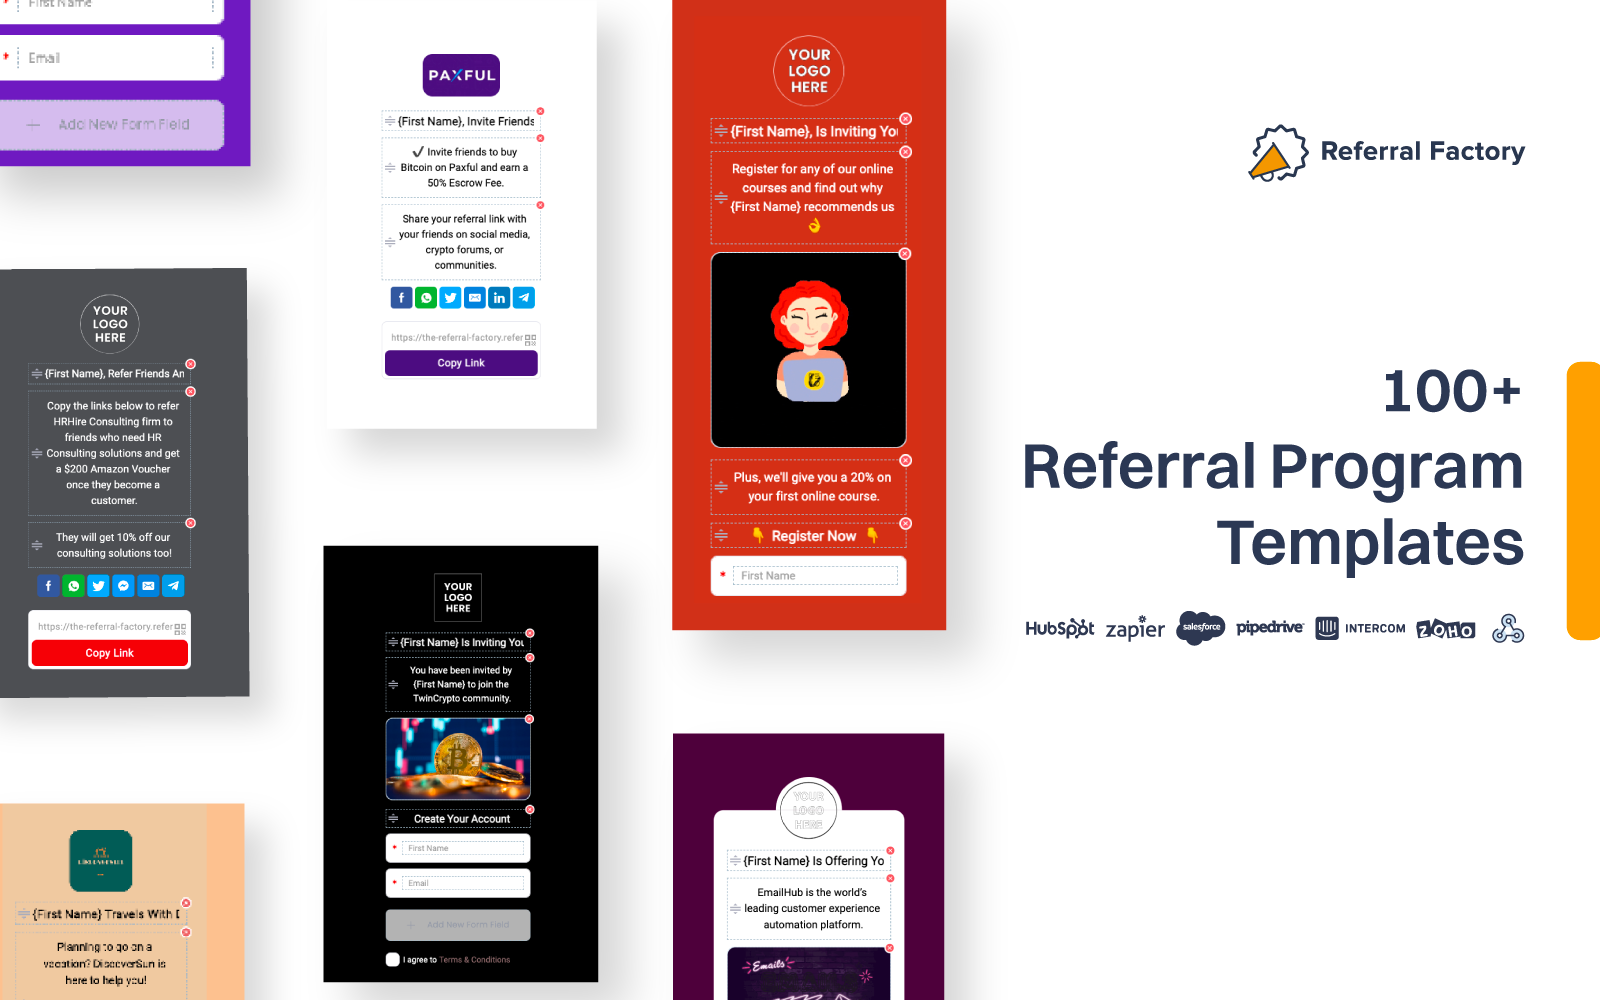 Access Over 100+ referral program templates designed by marketing experts to help you succeed and get maximum referrals.